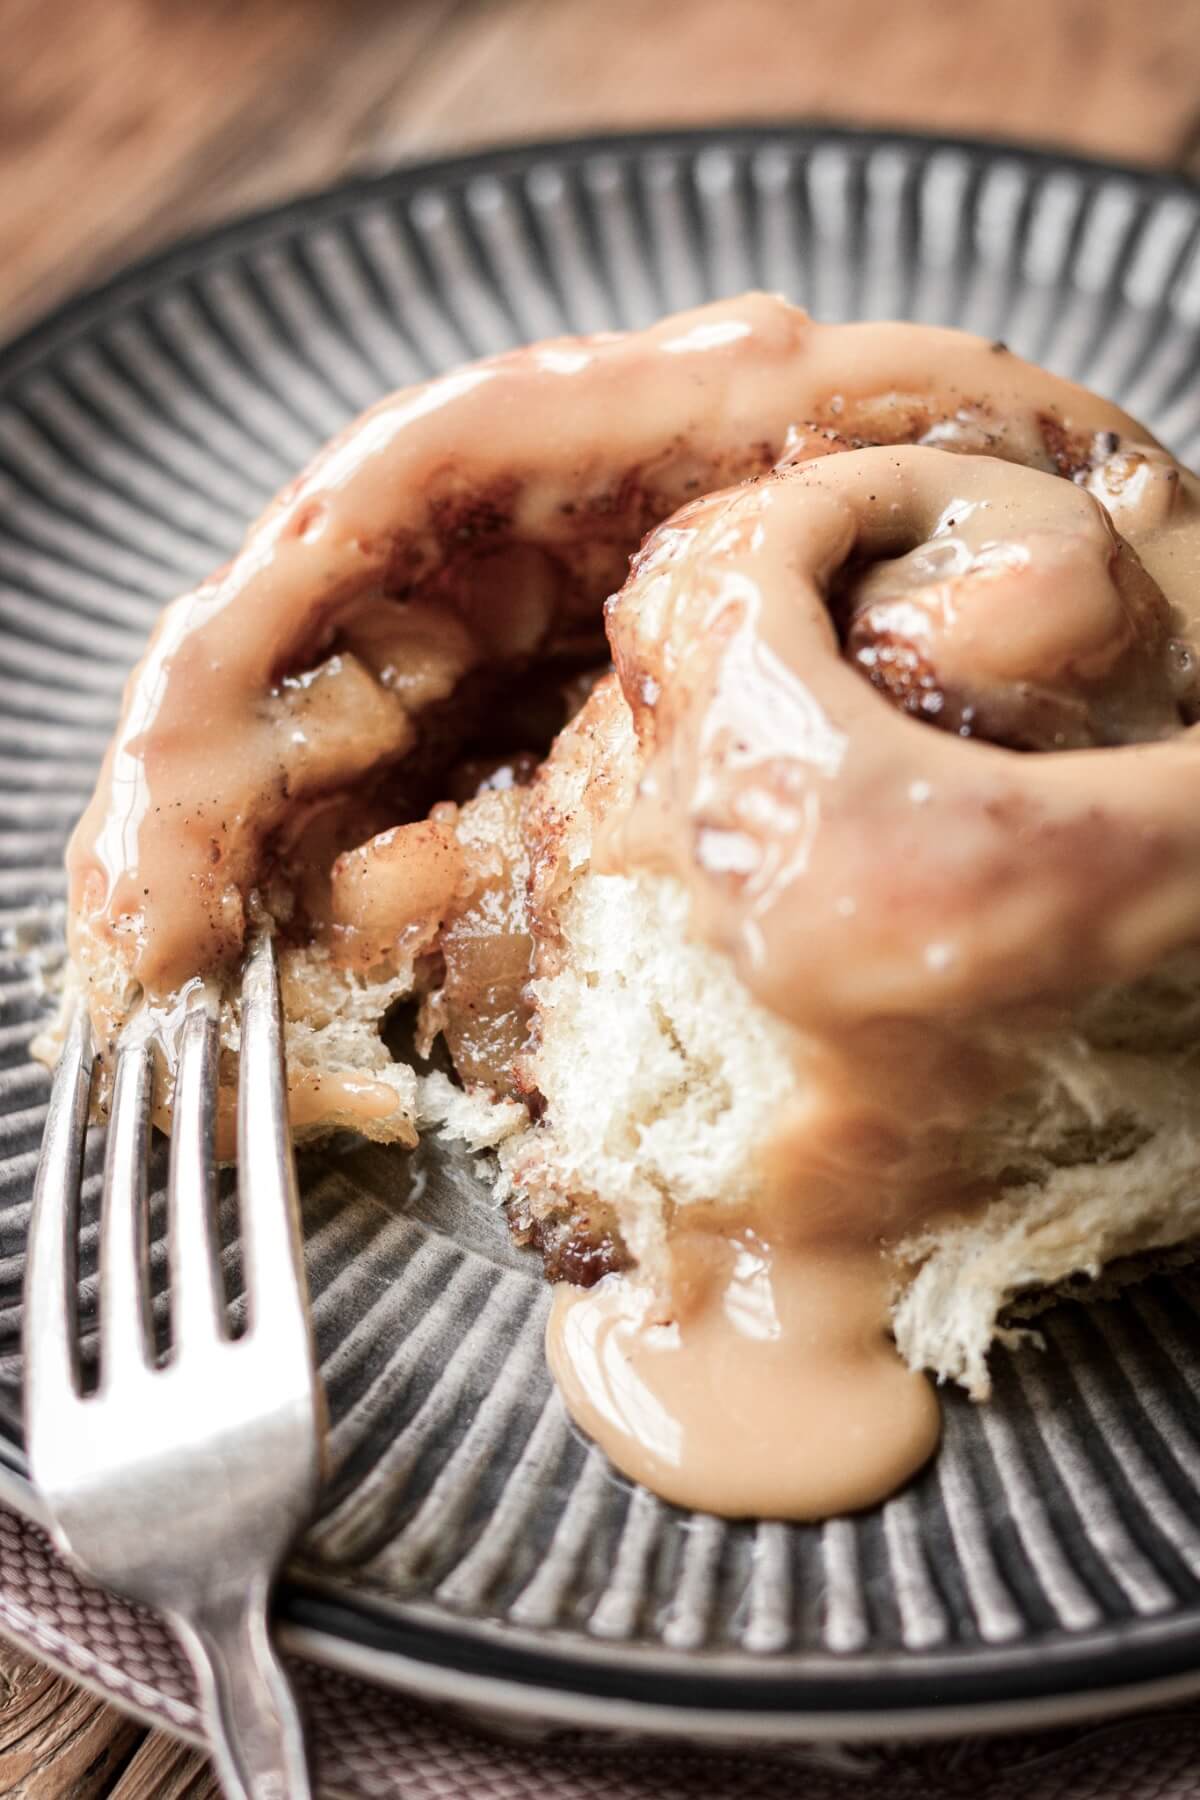 Apple pie cinnamon roll unrolled to show the filling inside.